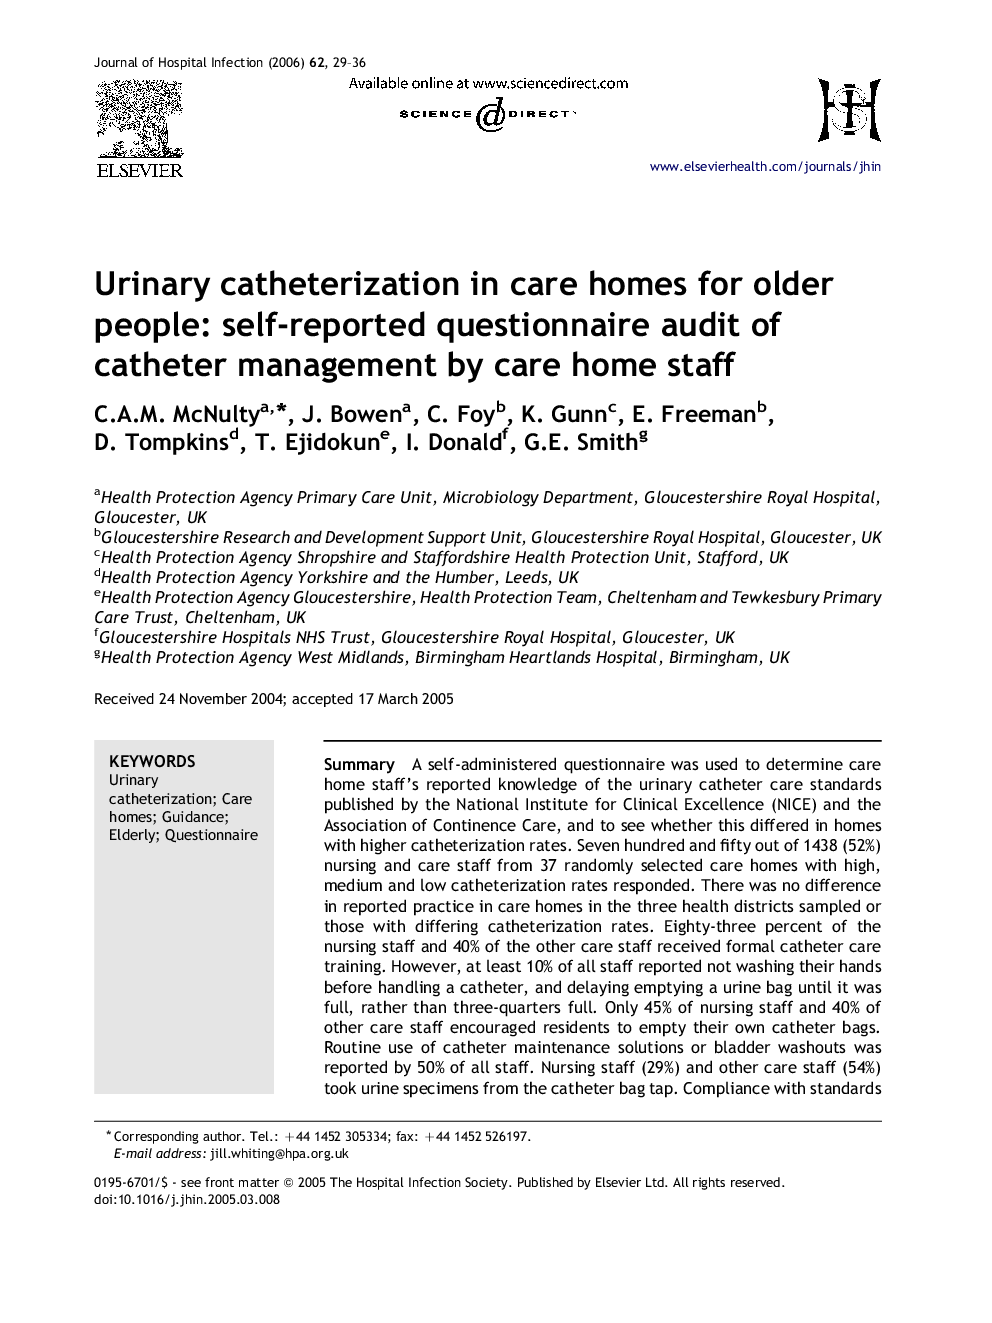 Urinary catheterization in care homes for older people: self-reported questionnaire audit of catheter management by care home staff